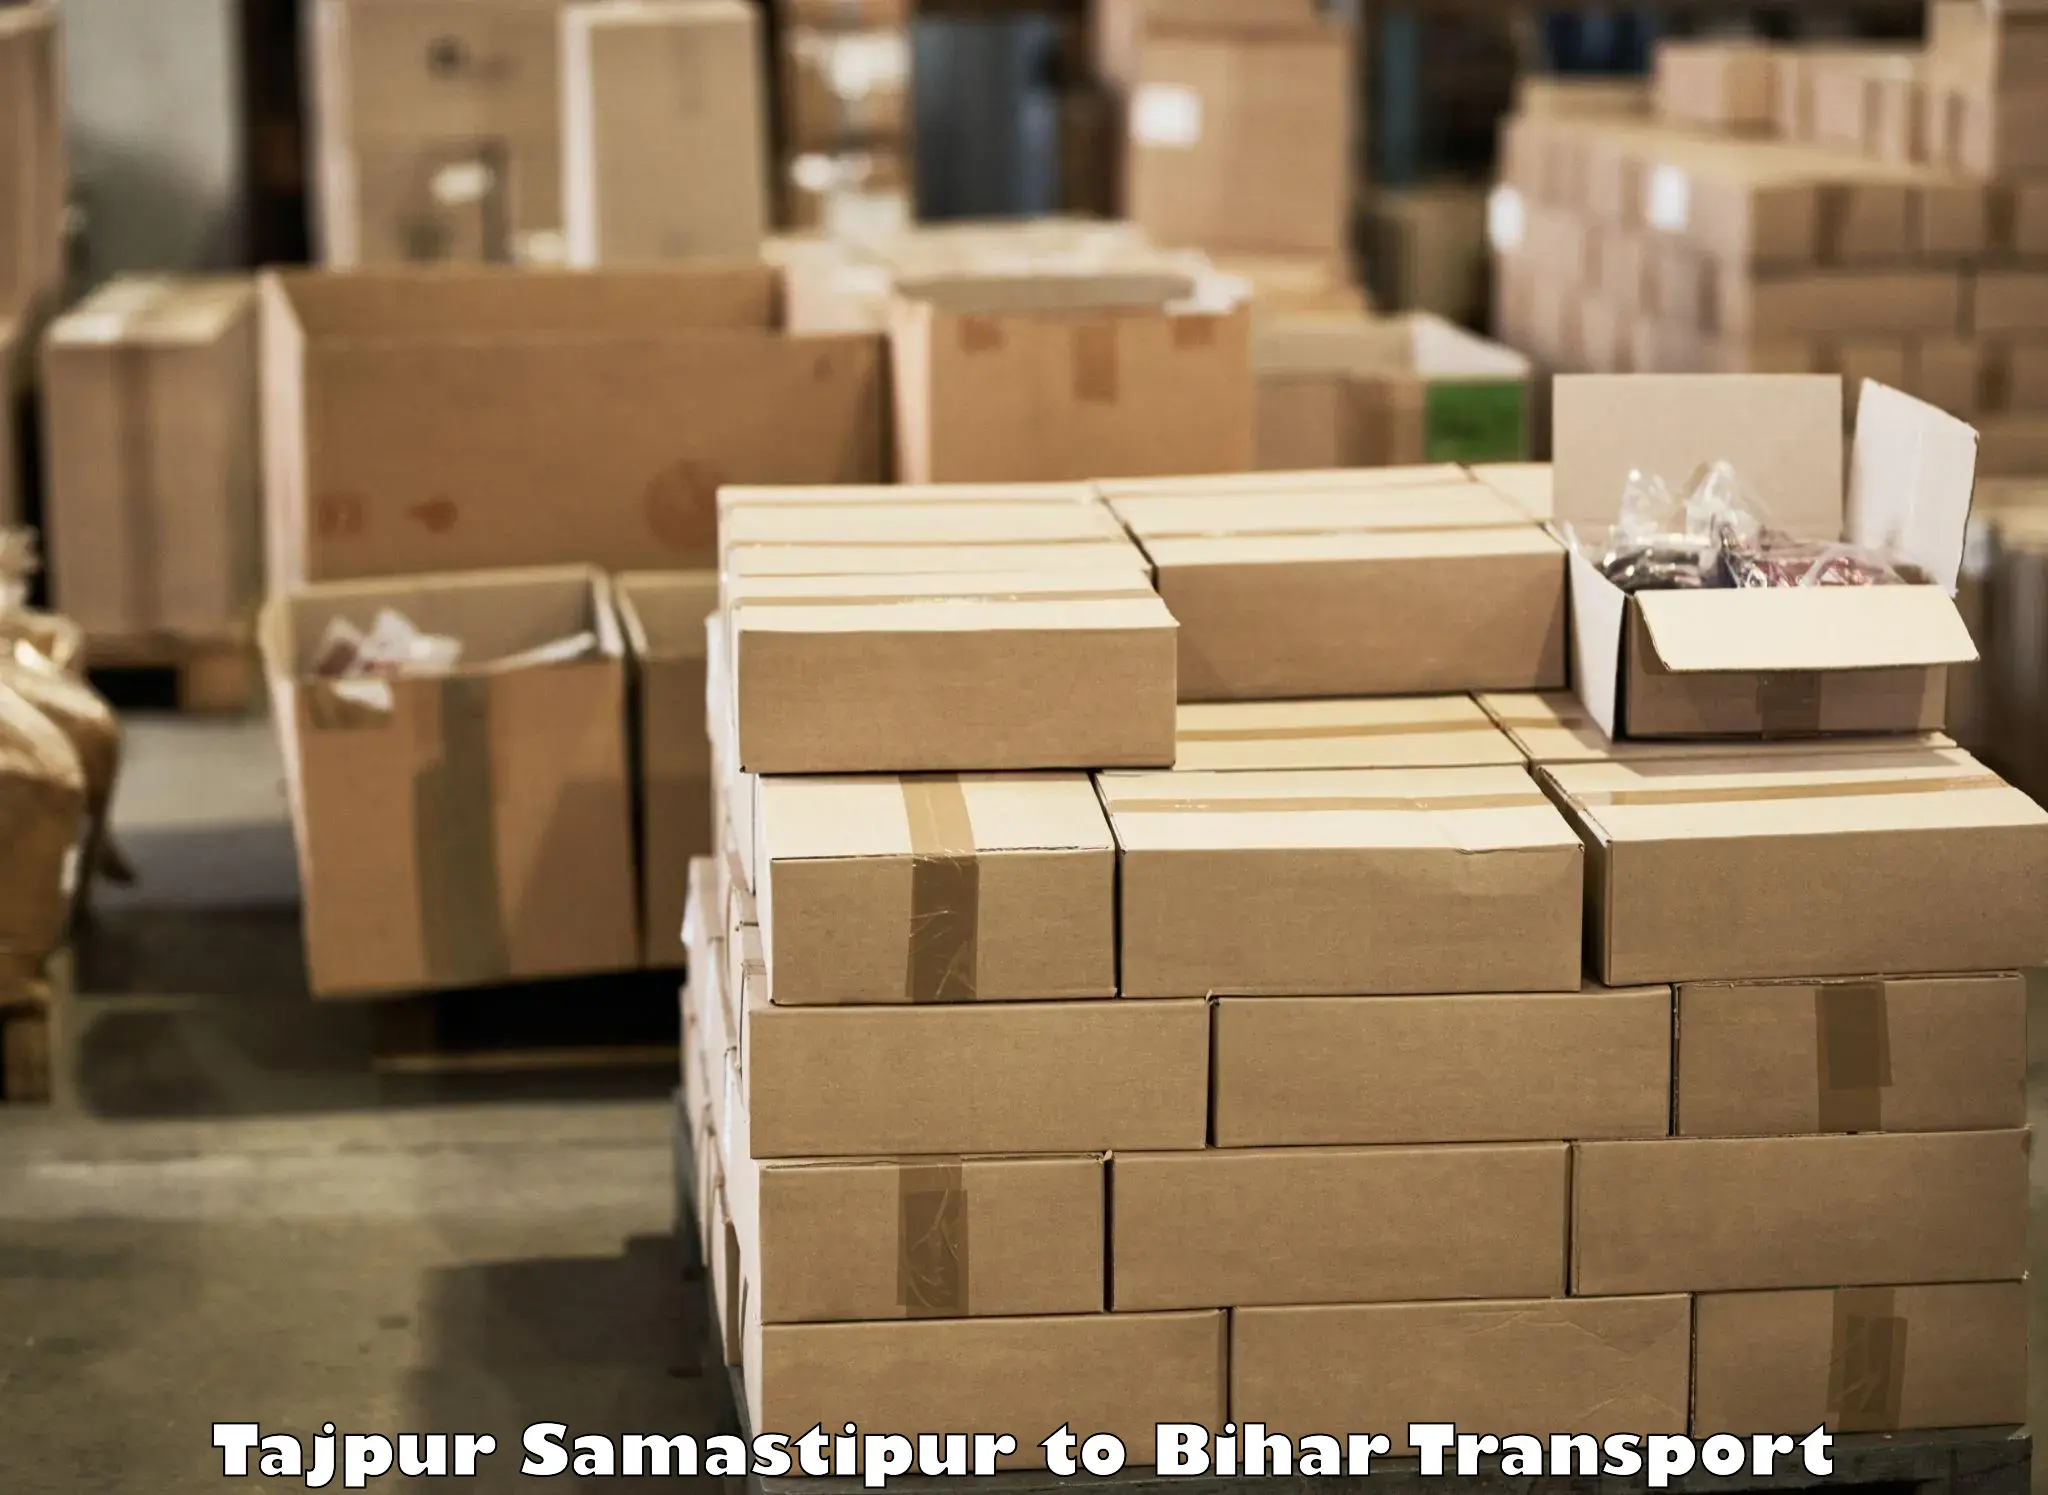 Package delivery services Tajpur Samastipur to Hasanpura